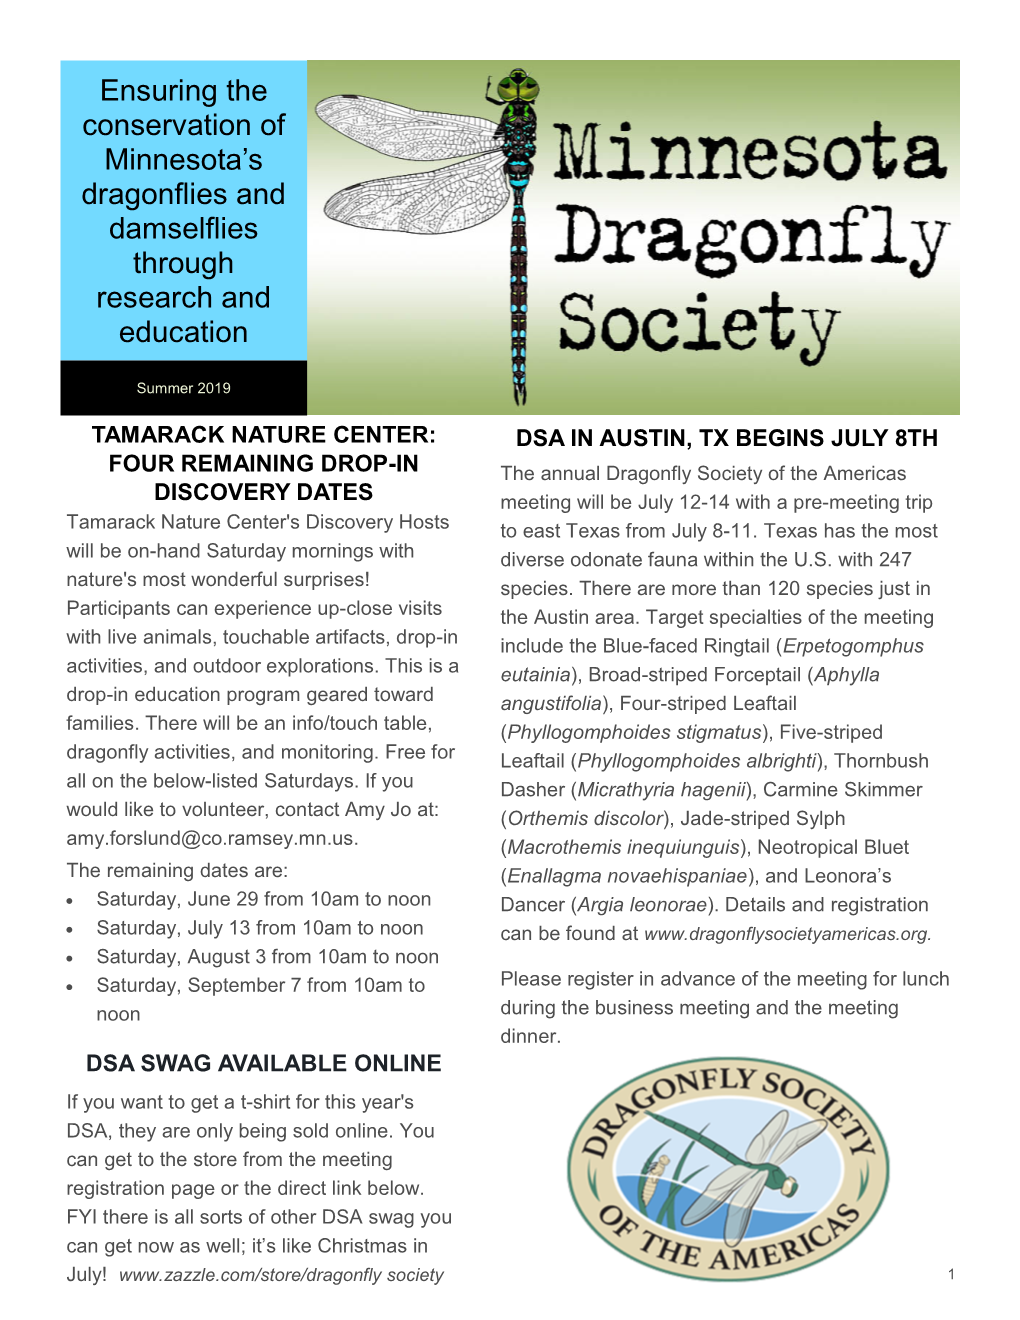 Ensuring the Conservation of Minnesota's Dragonflies and Damselflies Through Research and Education